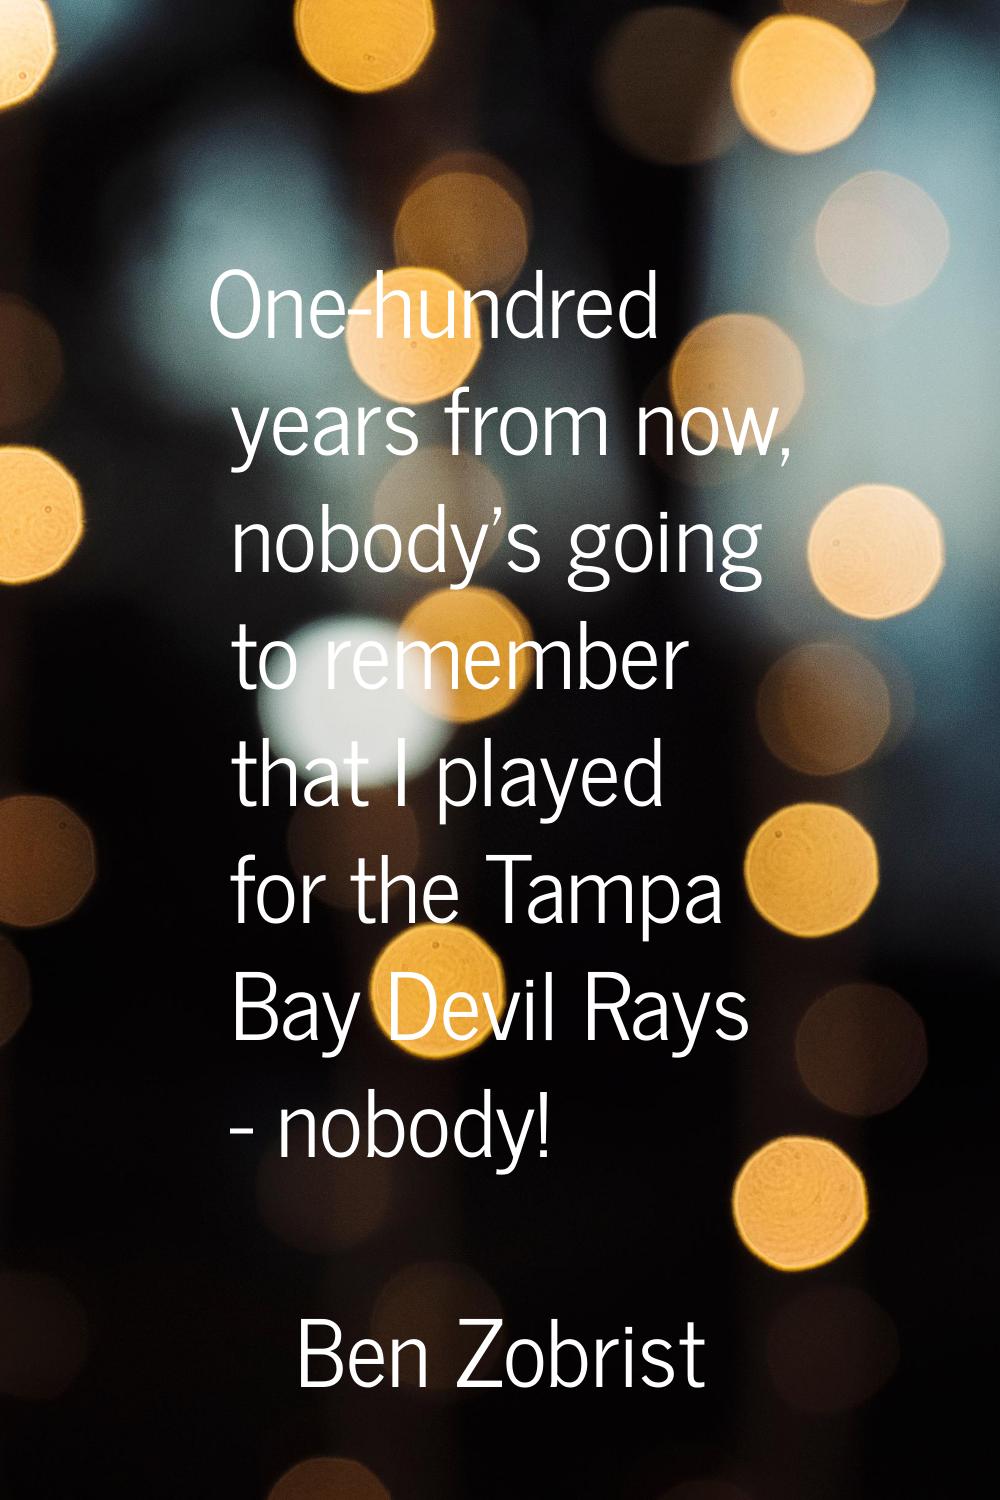 One-hundred years from now, nobody's going to remember that I played for the Tampa Bay Devil Rays -